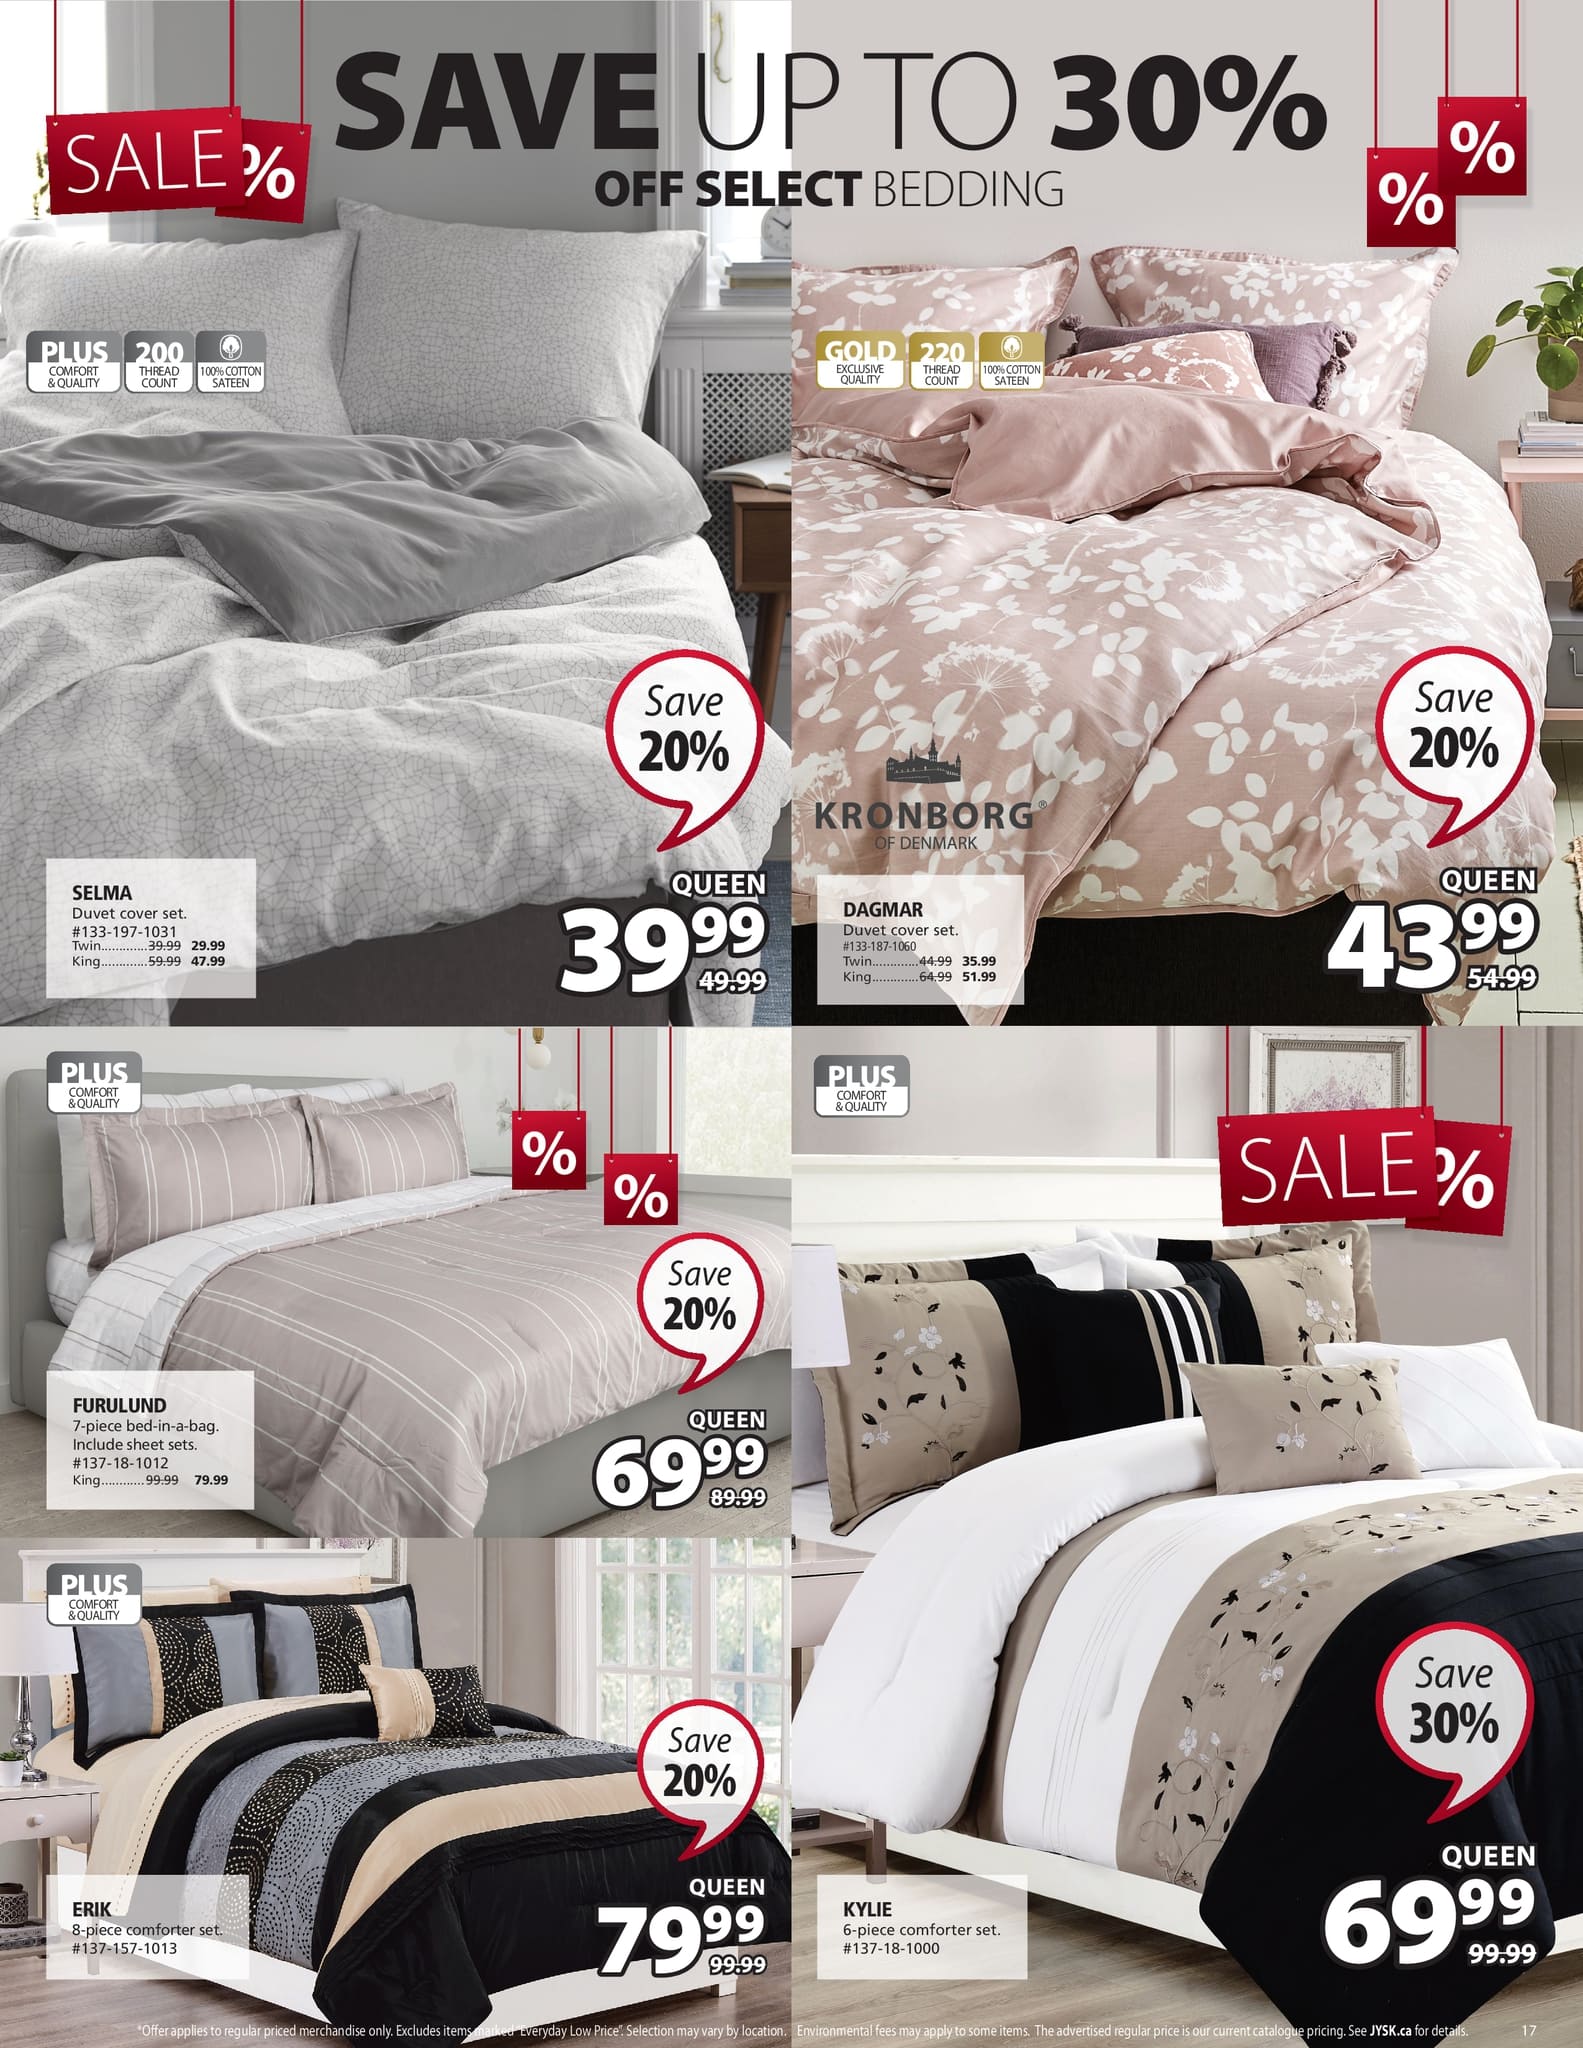 Jysk - Weekly Flyer Specials - Page 17